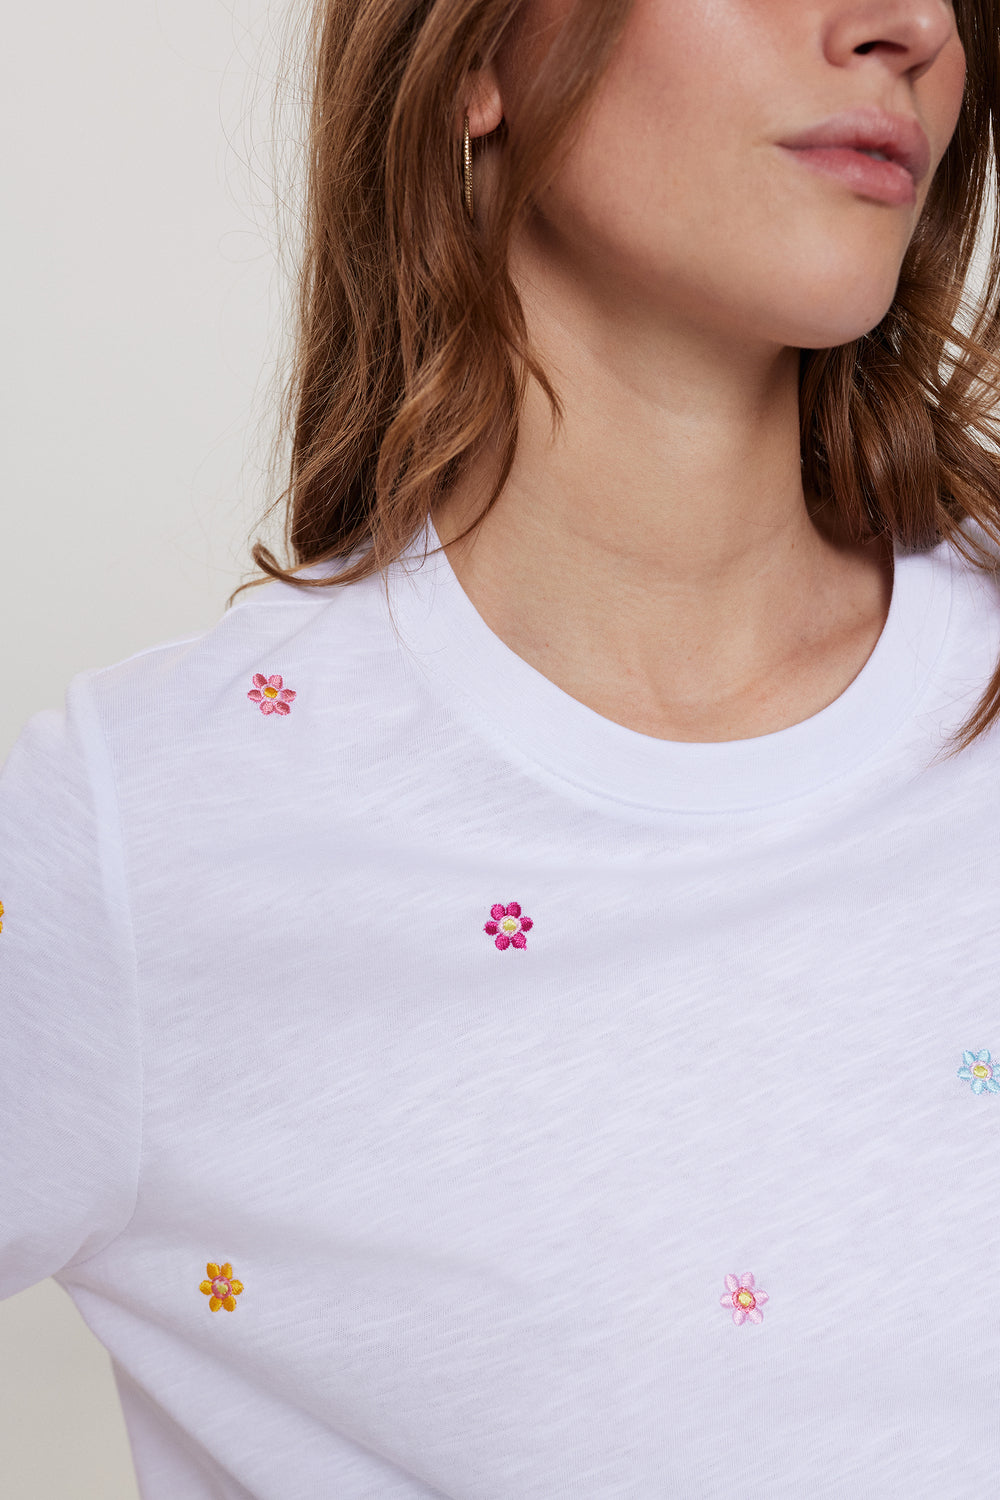 Numph nupilar t-shirt - bright white with flowers